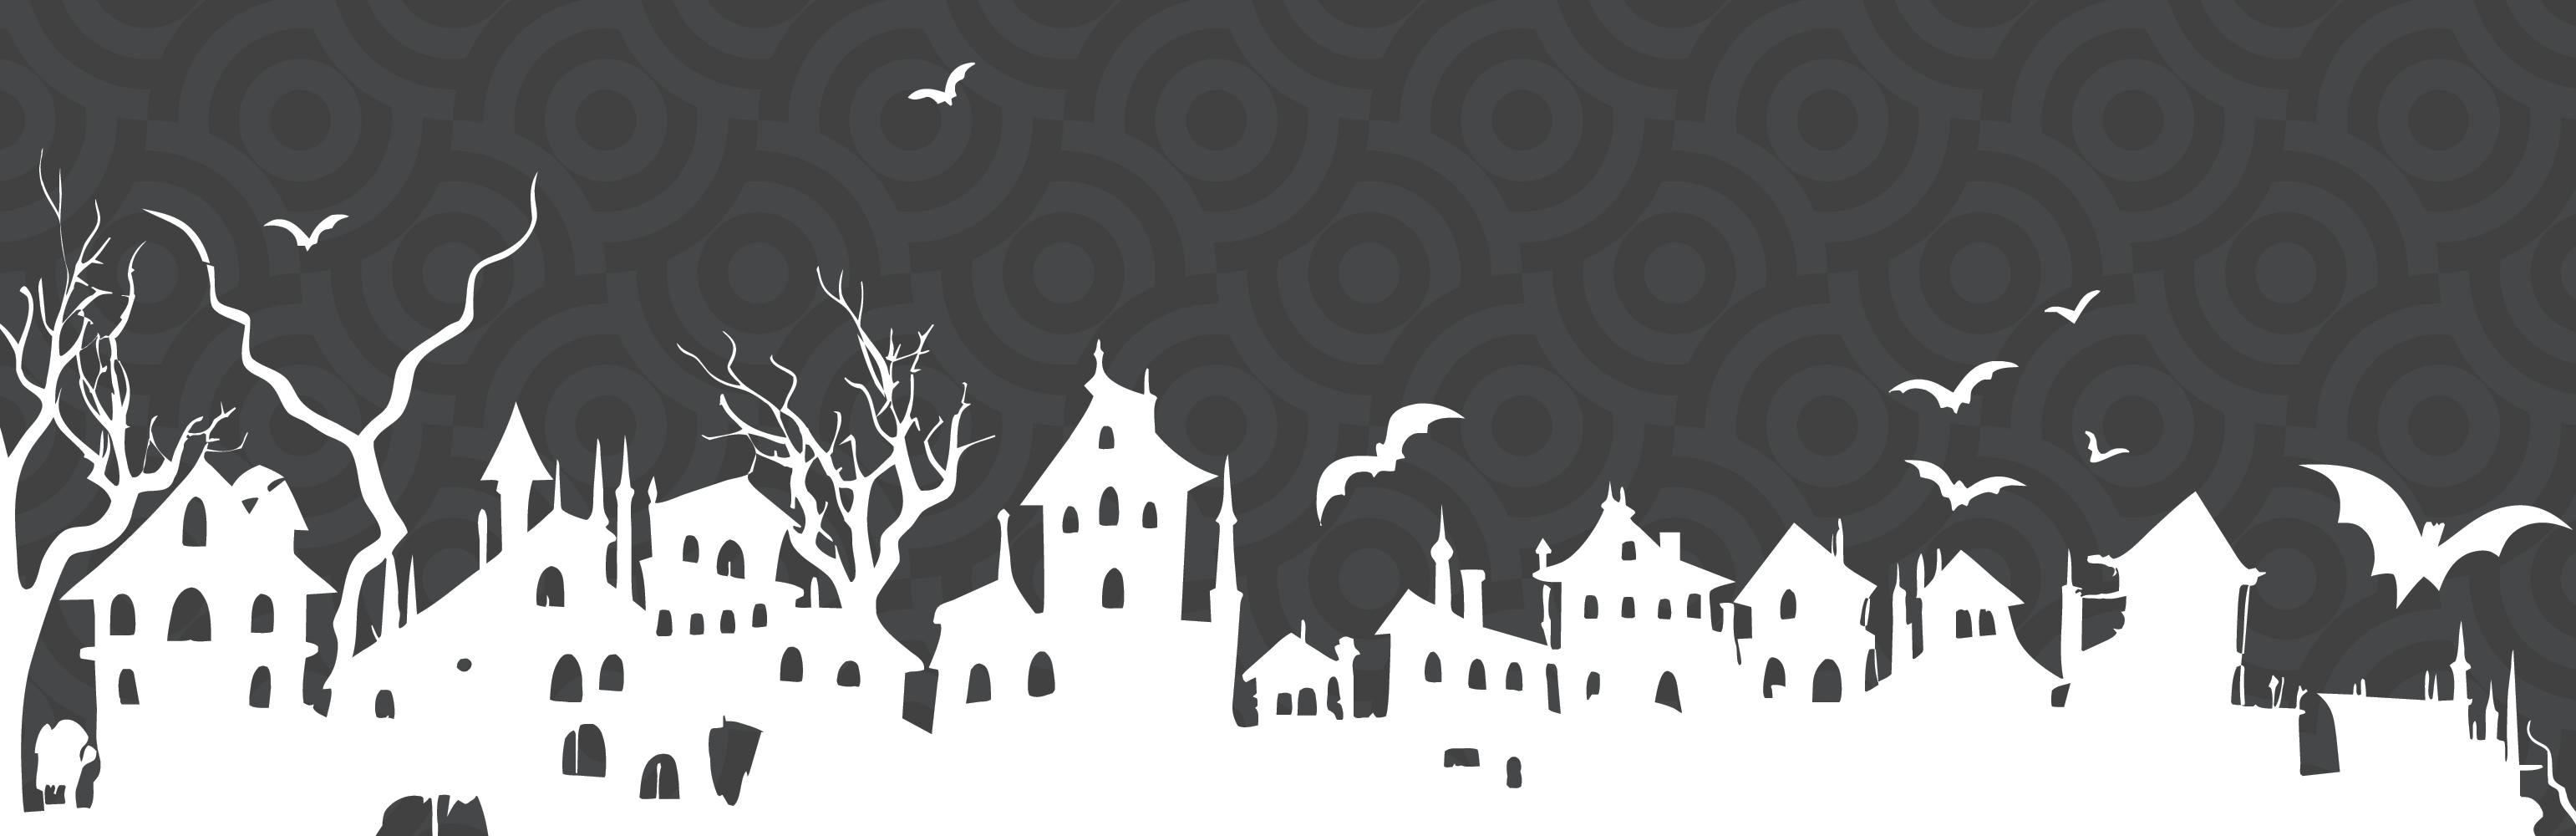 Silhouette image of spooky white houses, bats and gnarly trees set against black background